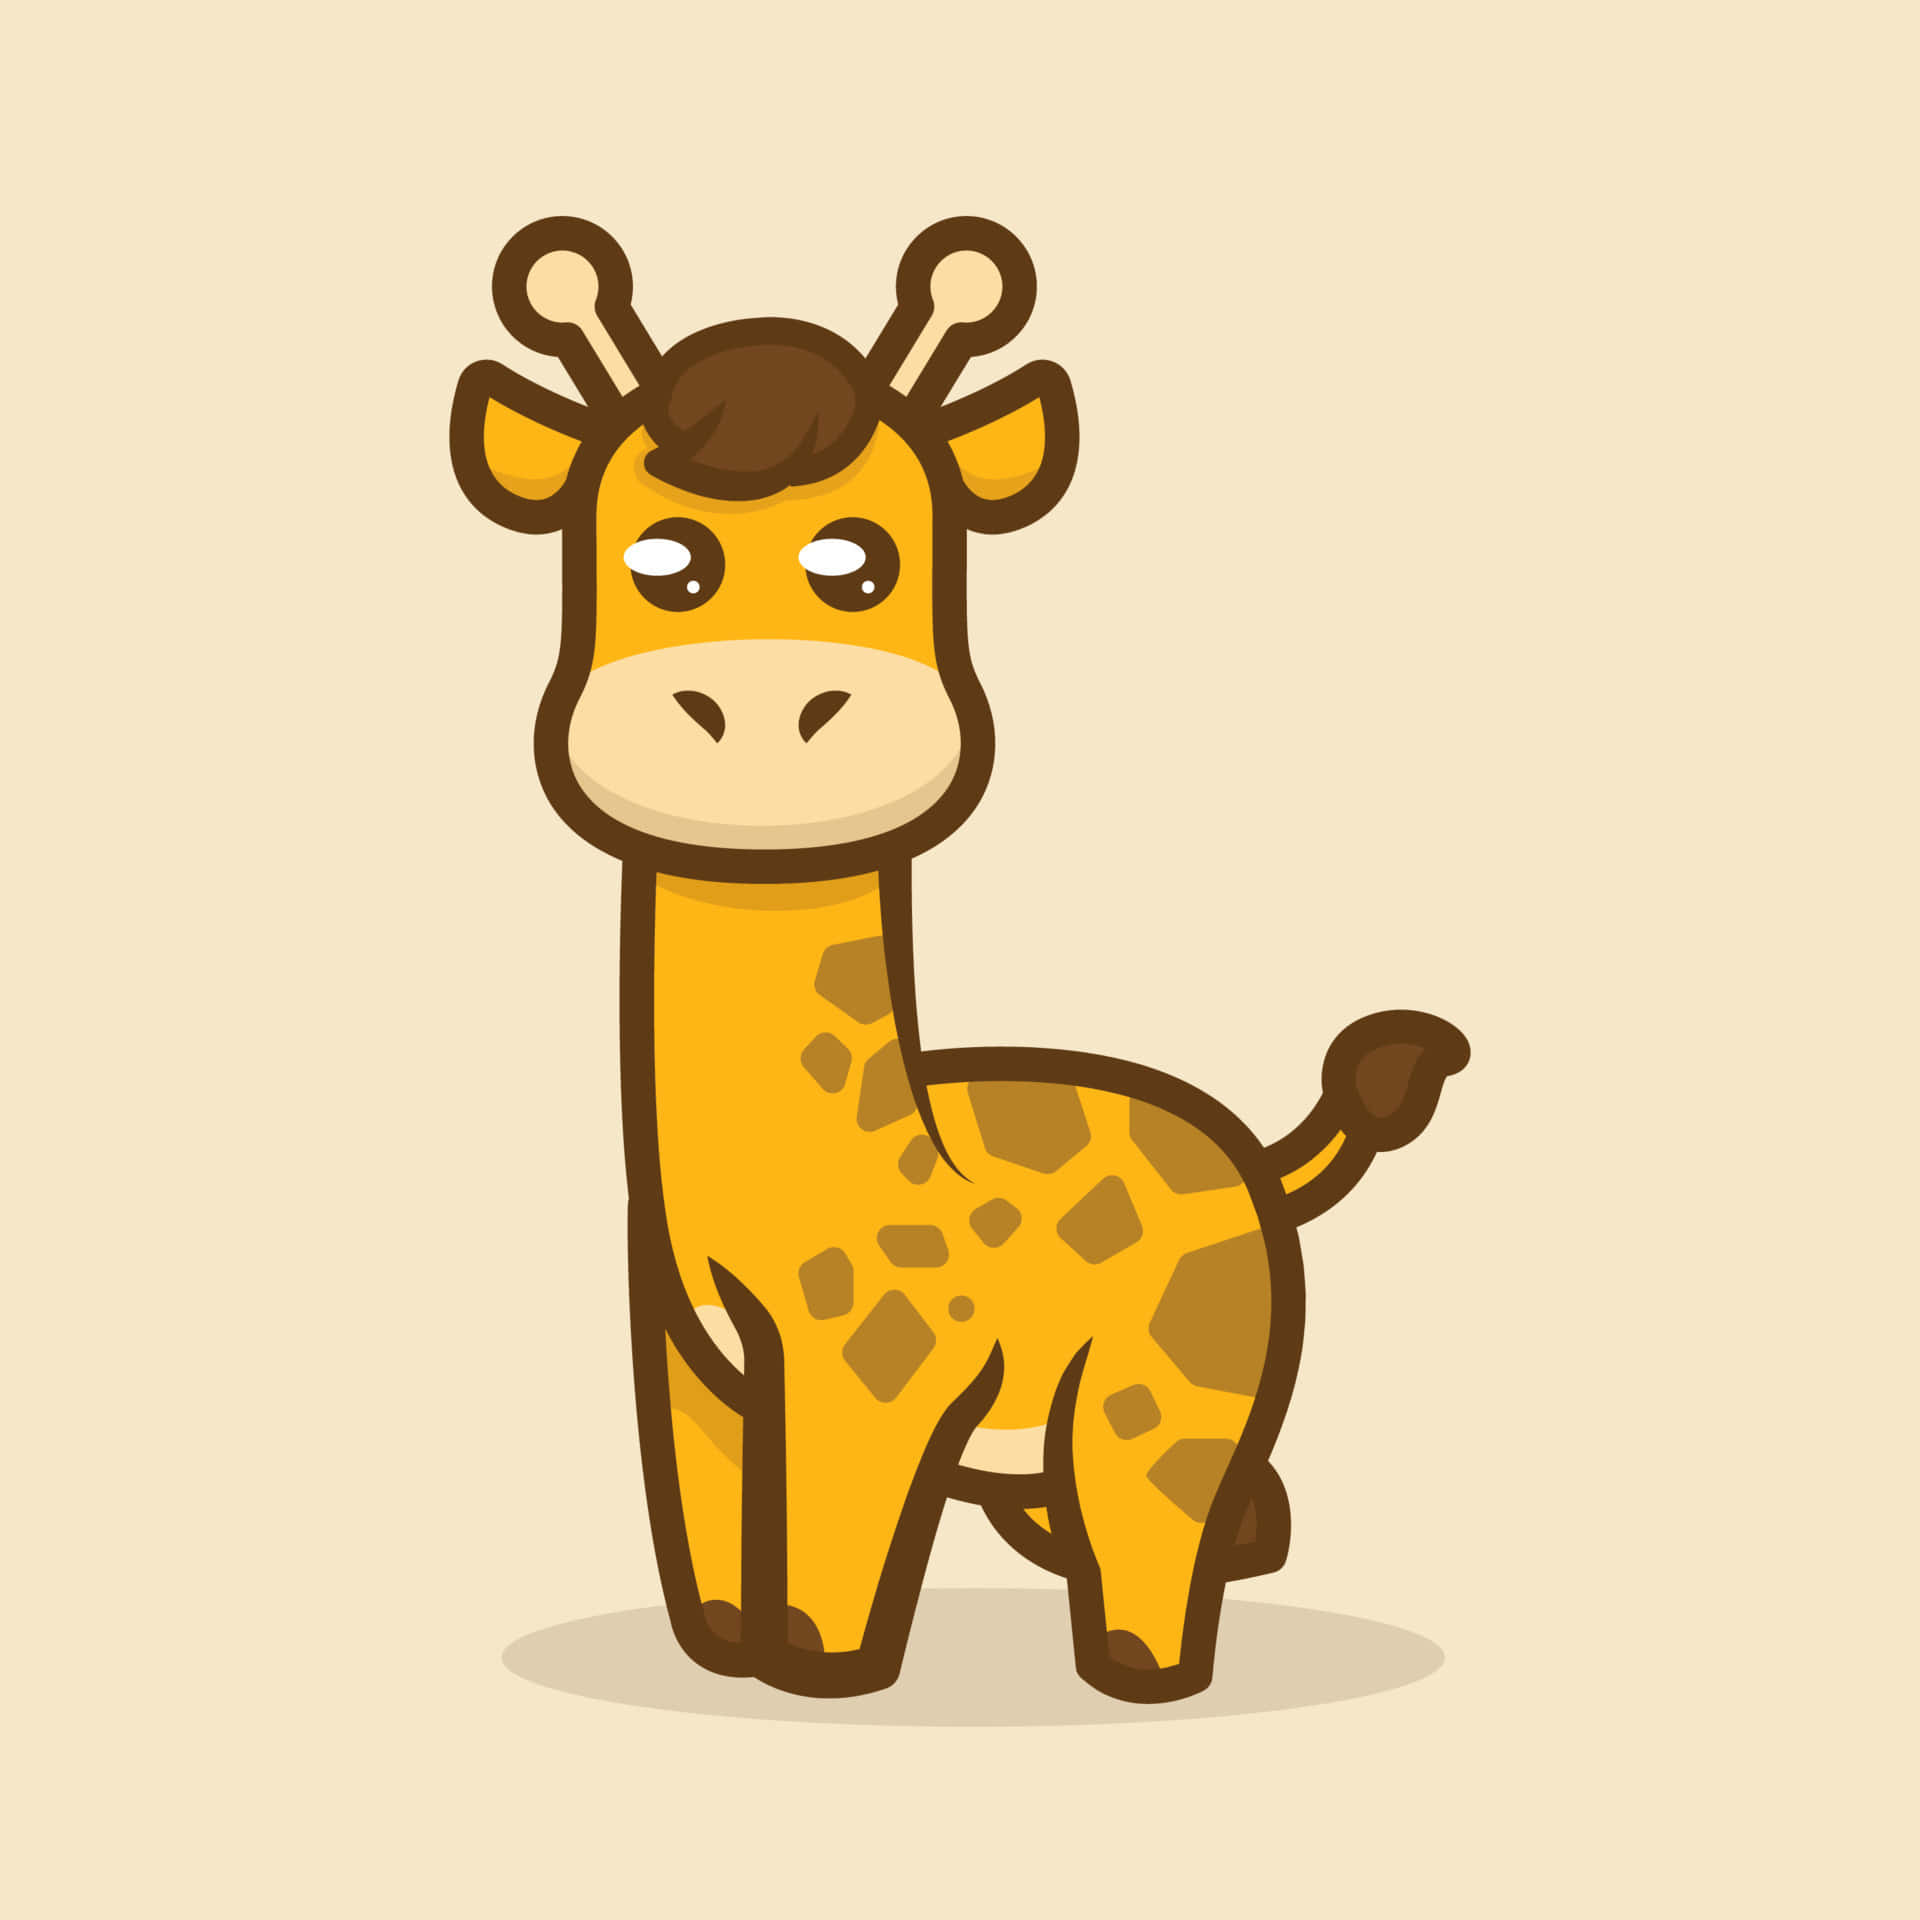 Cute Giraffe Cartoon With Spots On Yellow Picture